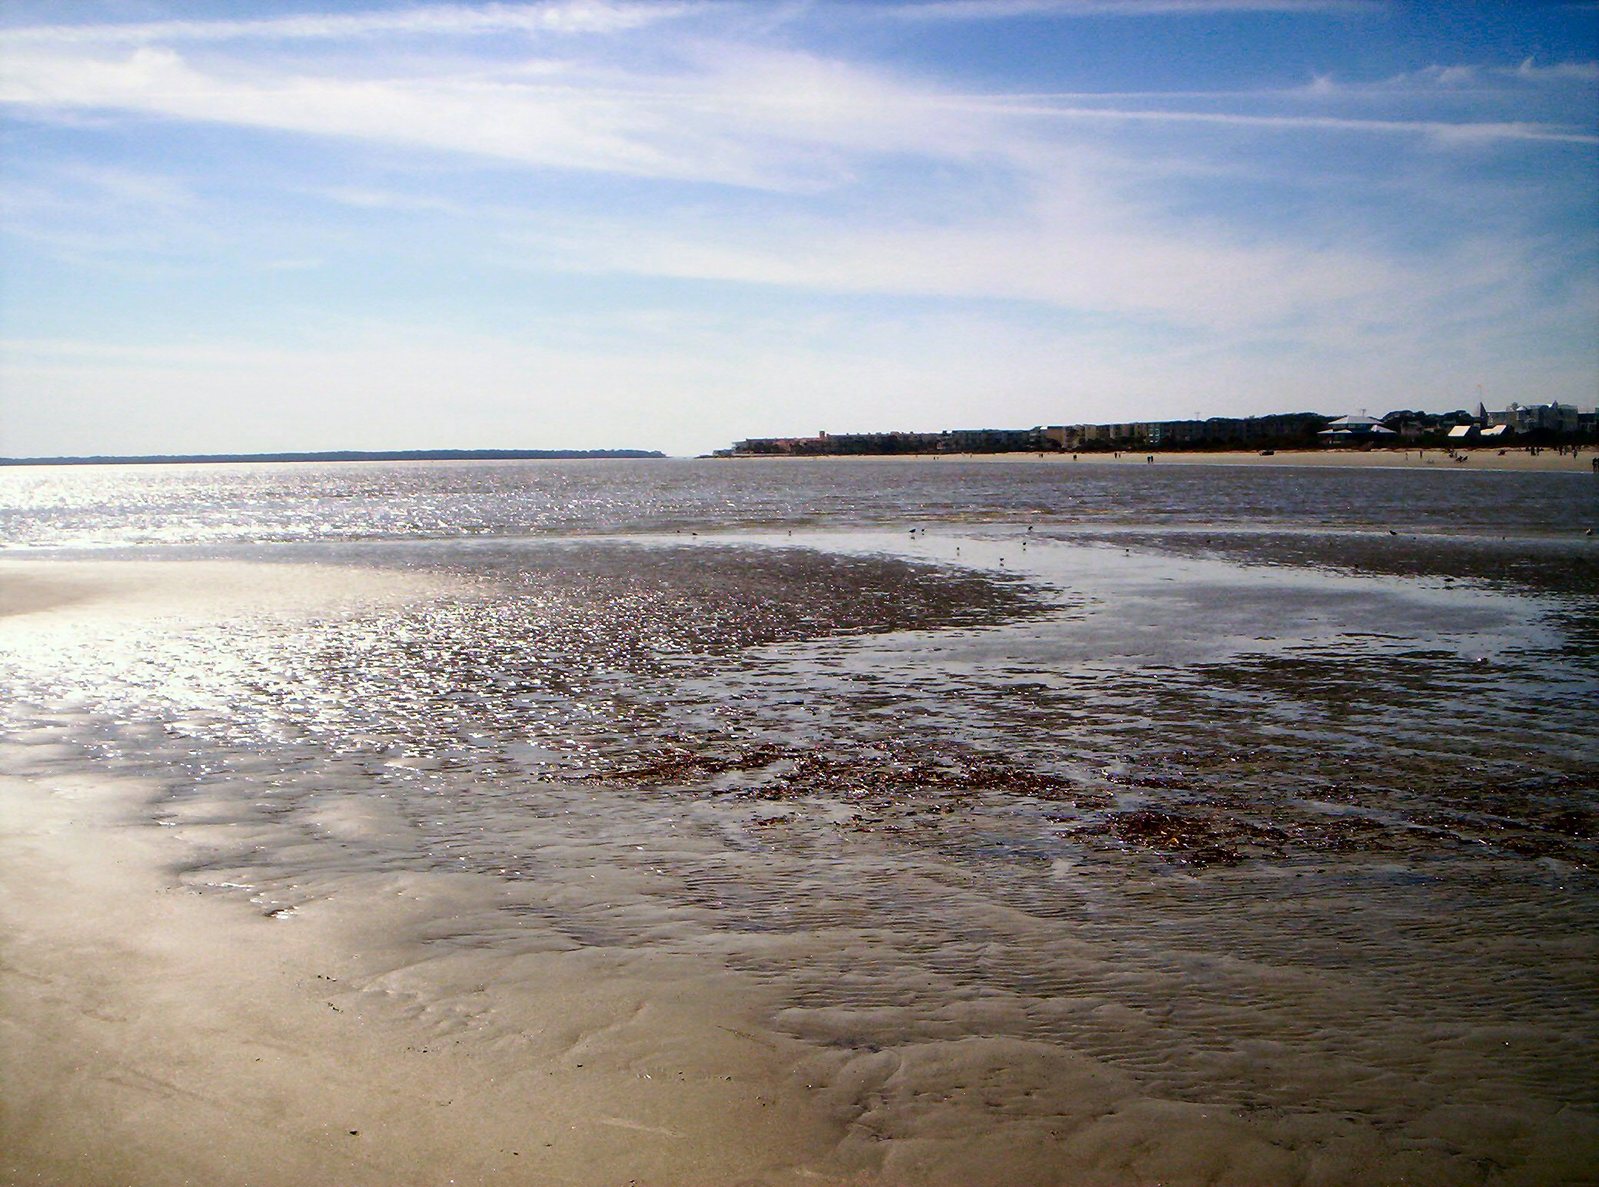 the ocean water is glistening at a low tide